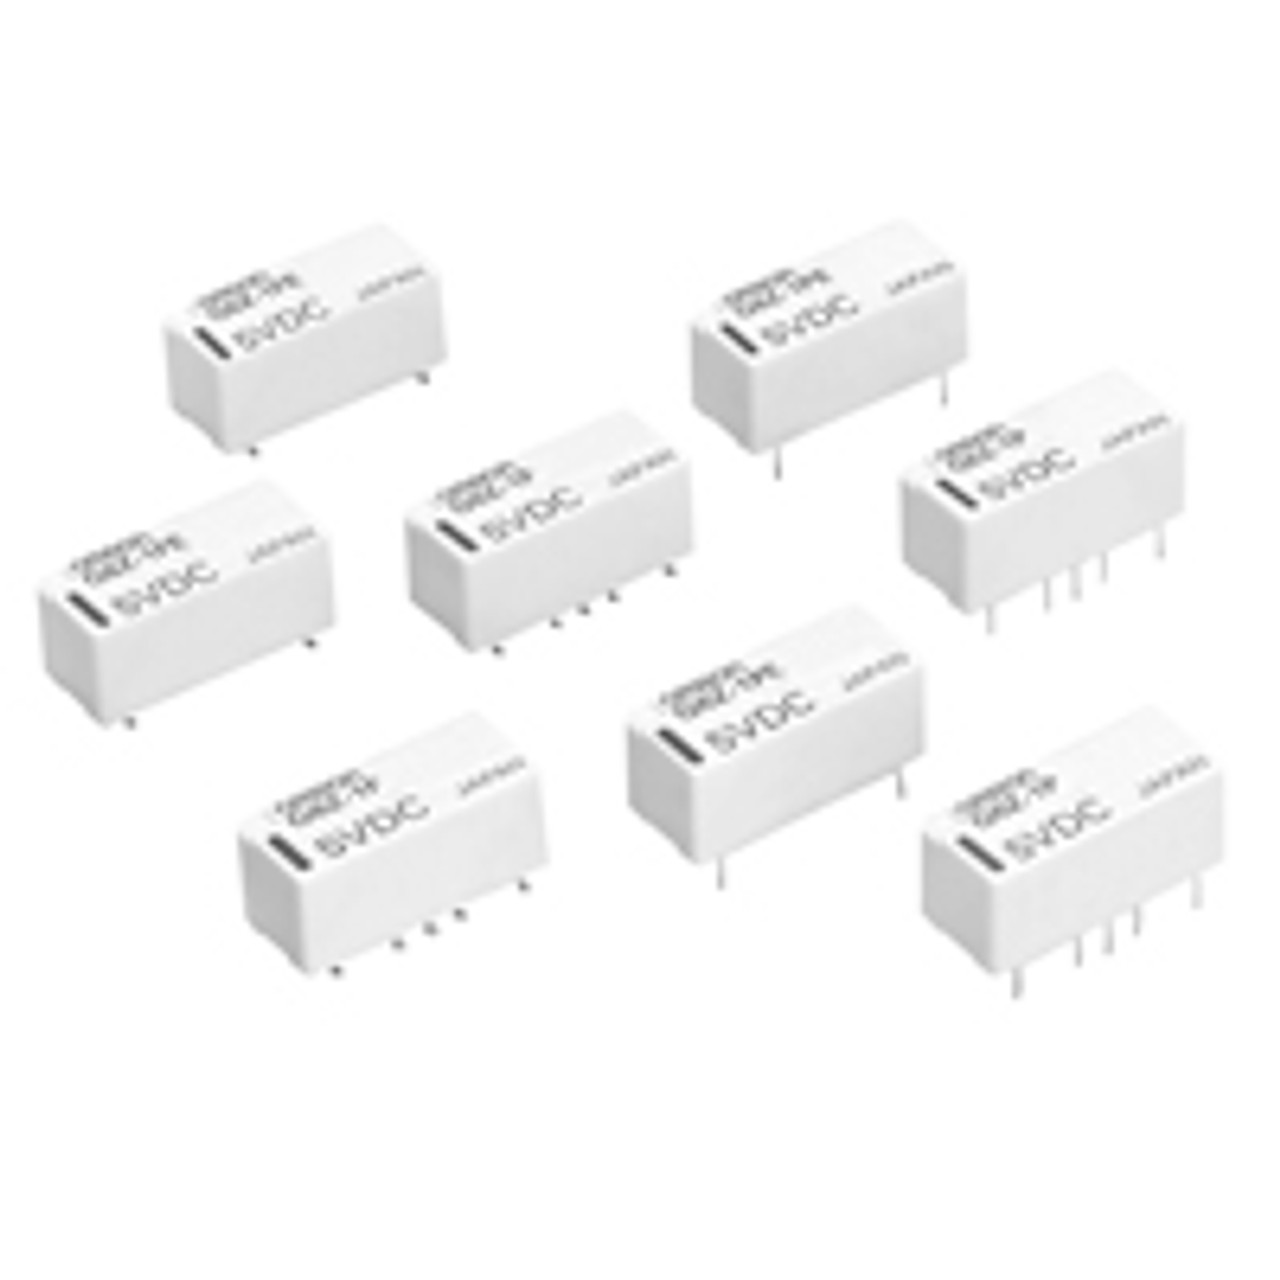 Omron G6ZK-1FEADC24 High Frequency Relays